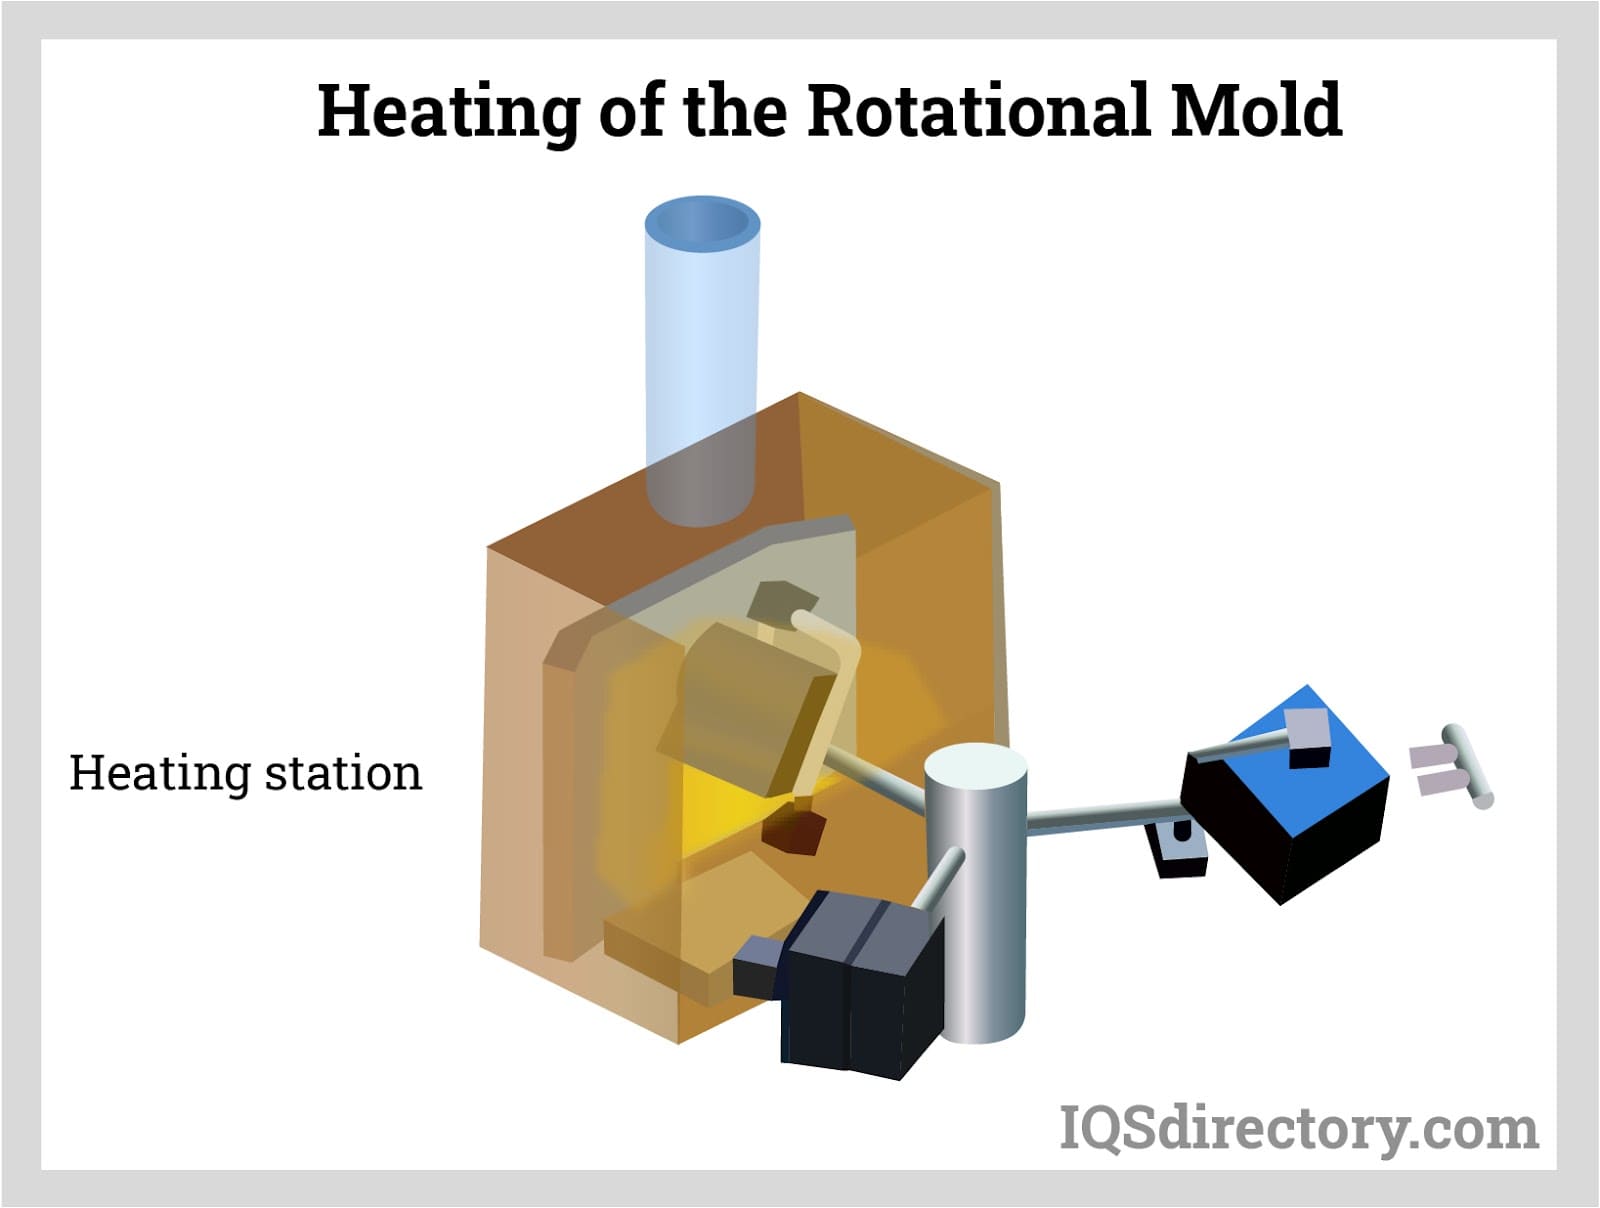 Heating of the Rotational Mold